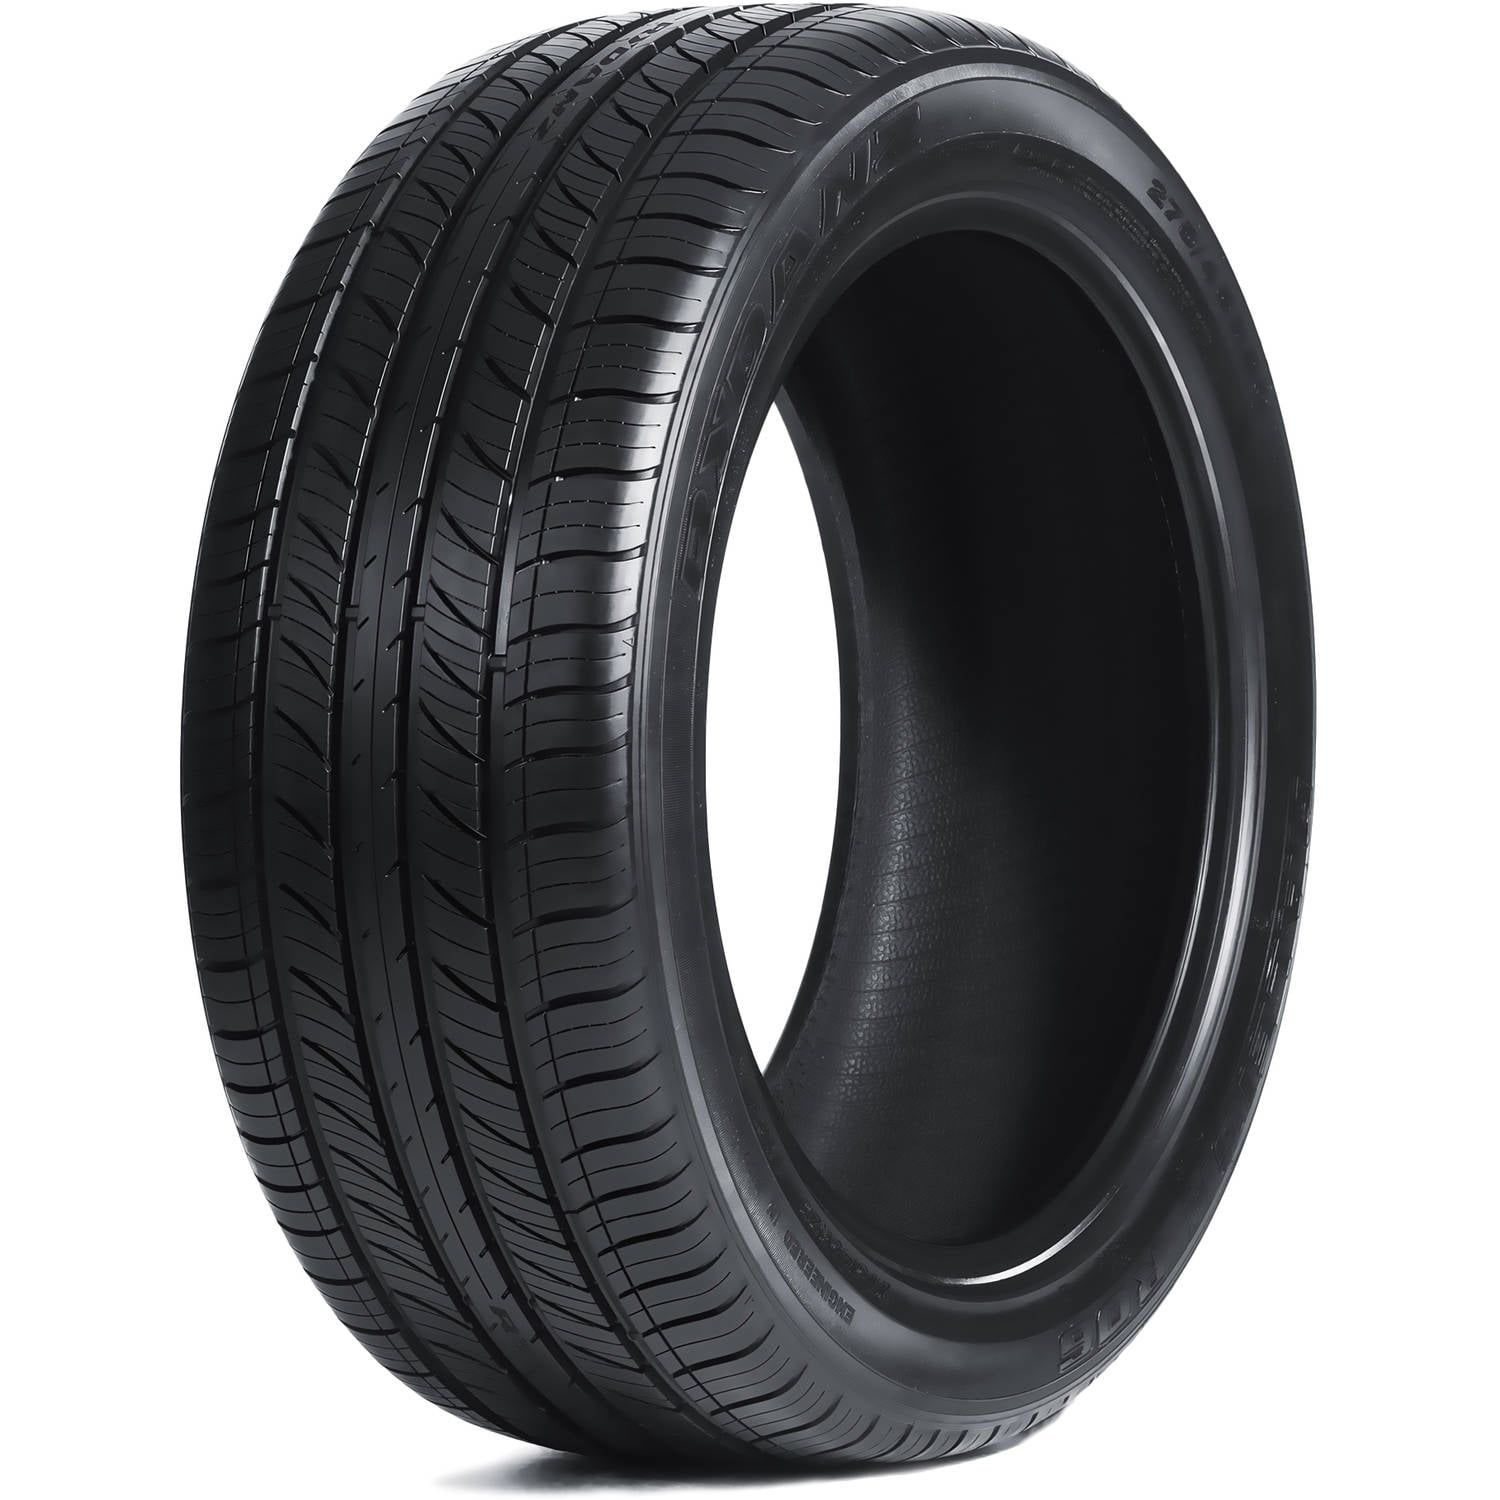 Rydanz Raleigh R R  H Tire Fits:  Chevrolet Equinox LT,   Subaru Outback 3.6R Touring